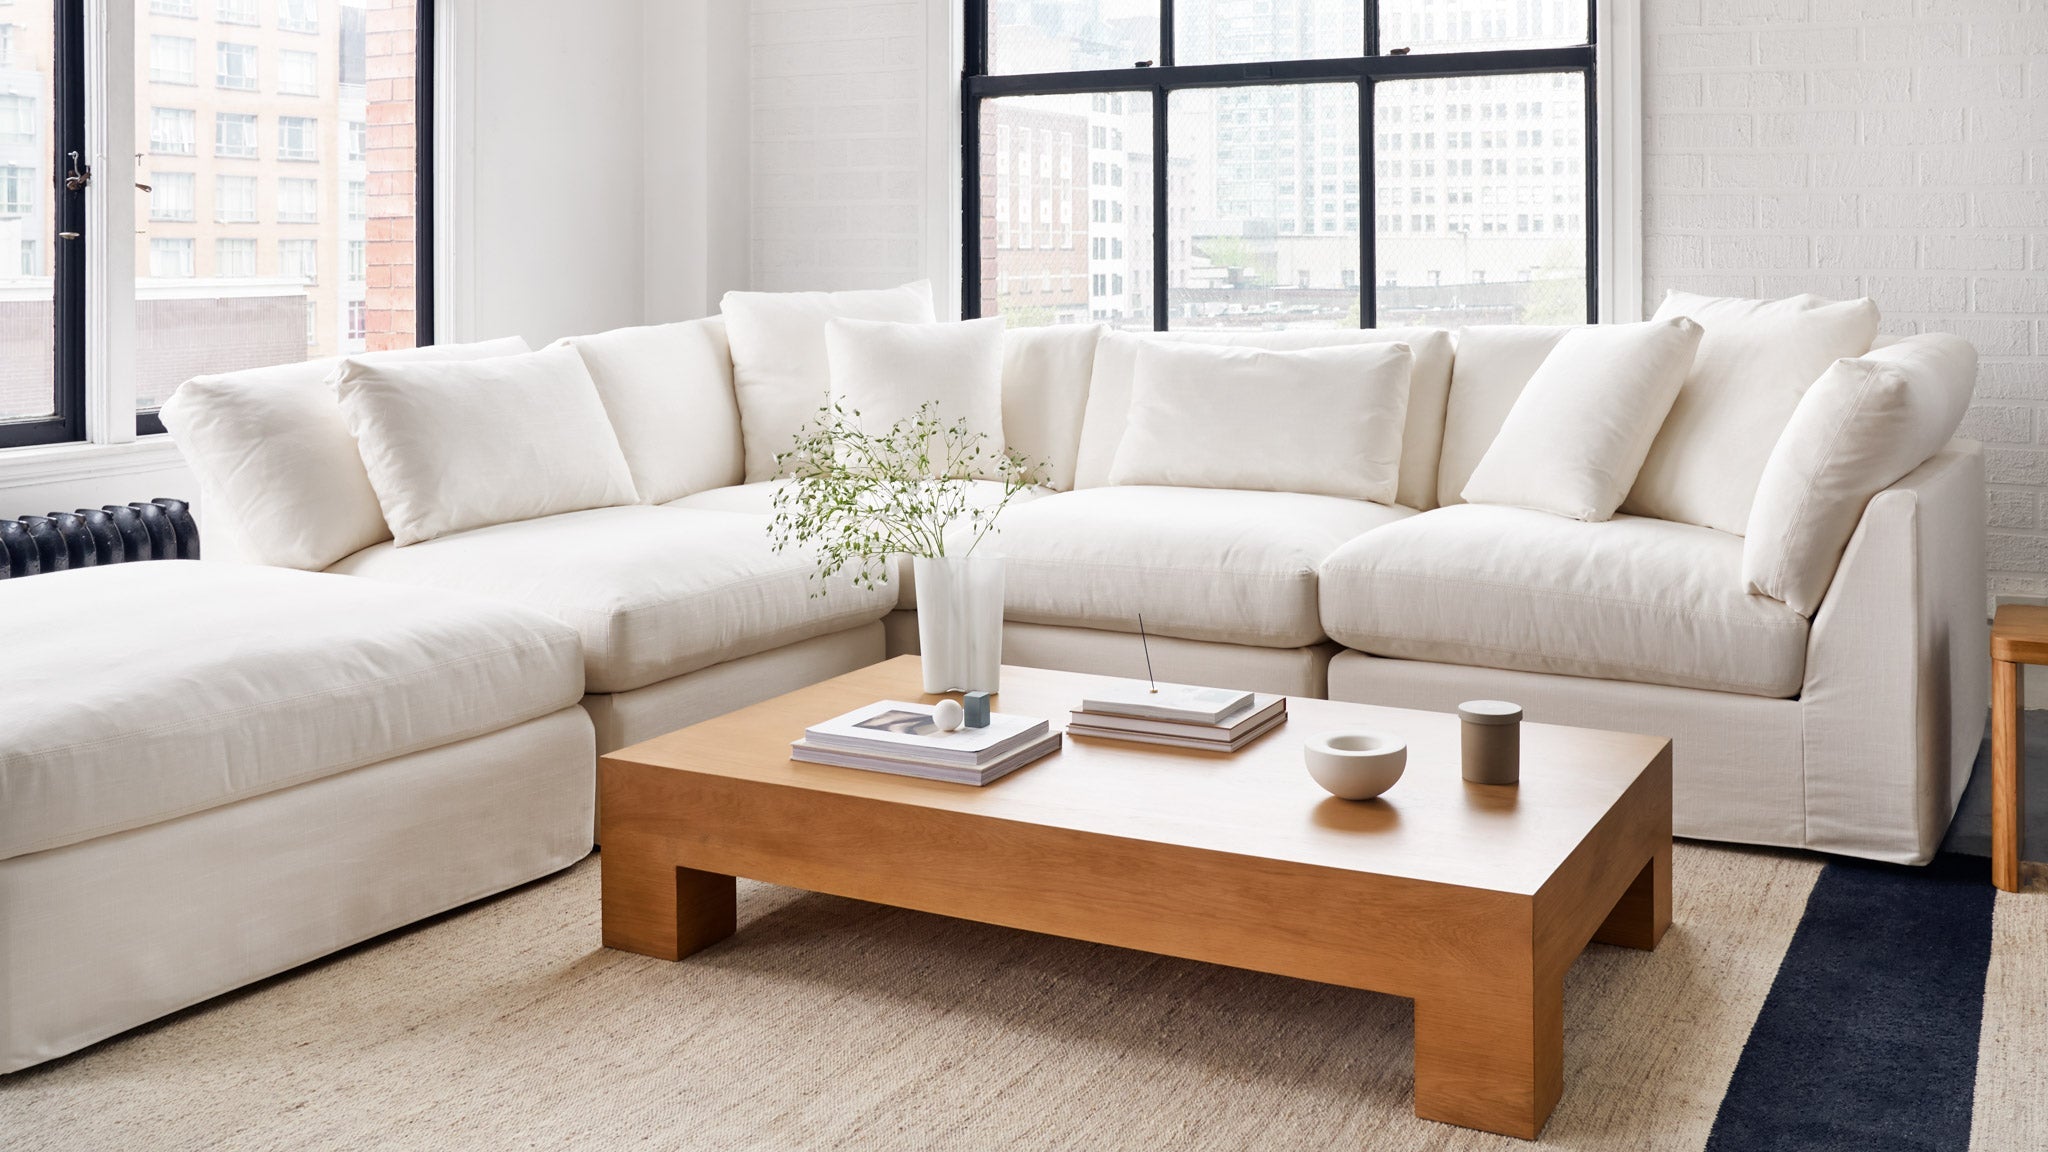 Get Together™ 5-Piece Modular Sectional Closed, Standard, Cream Linen - Image 3